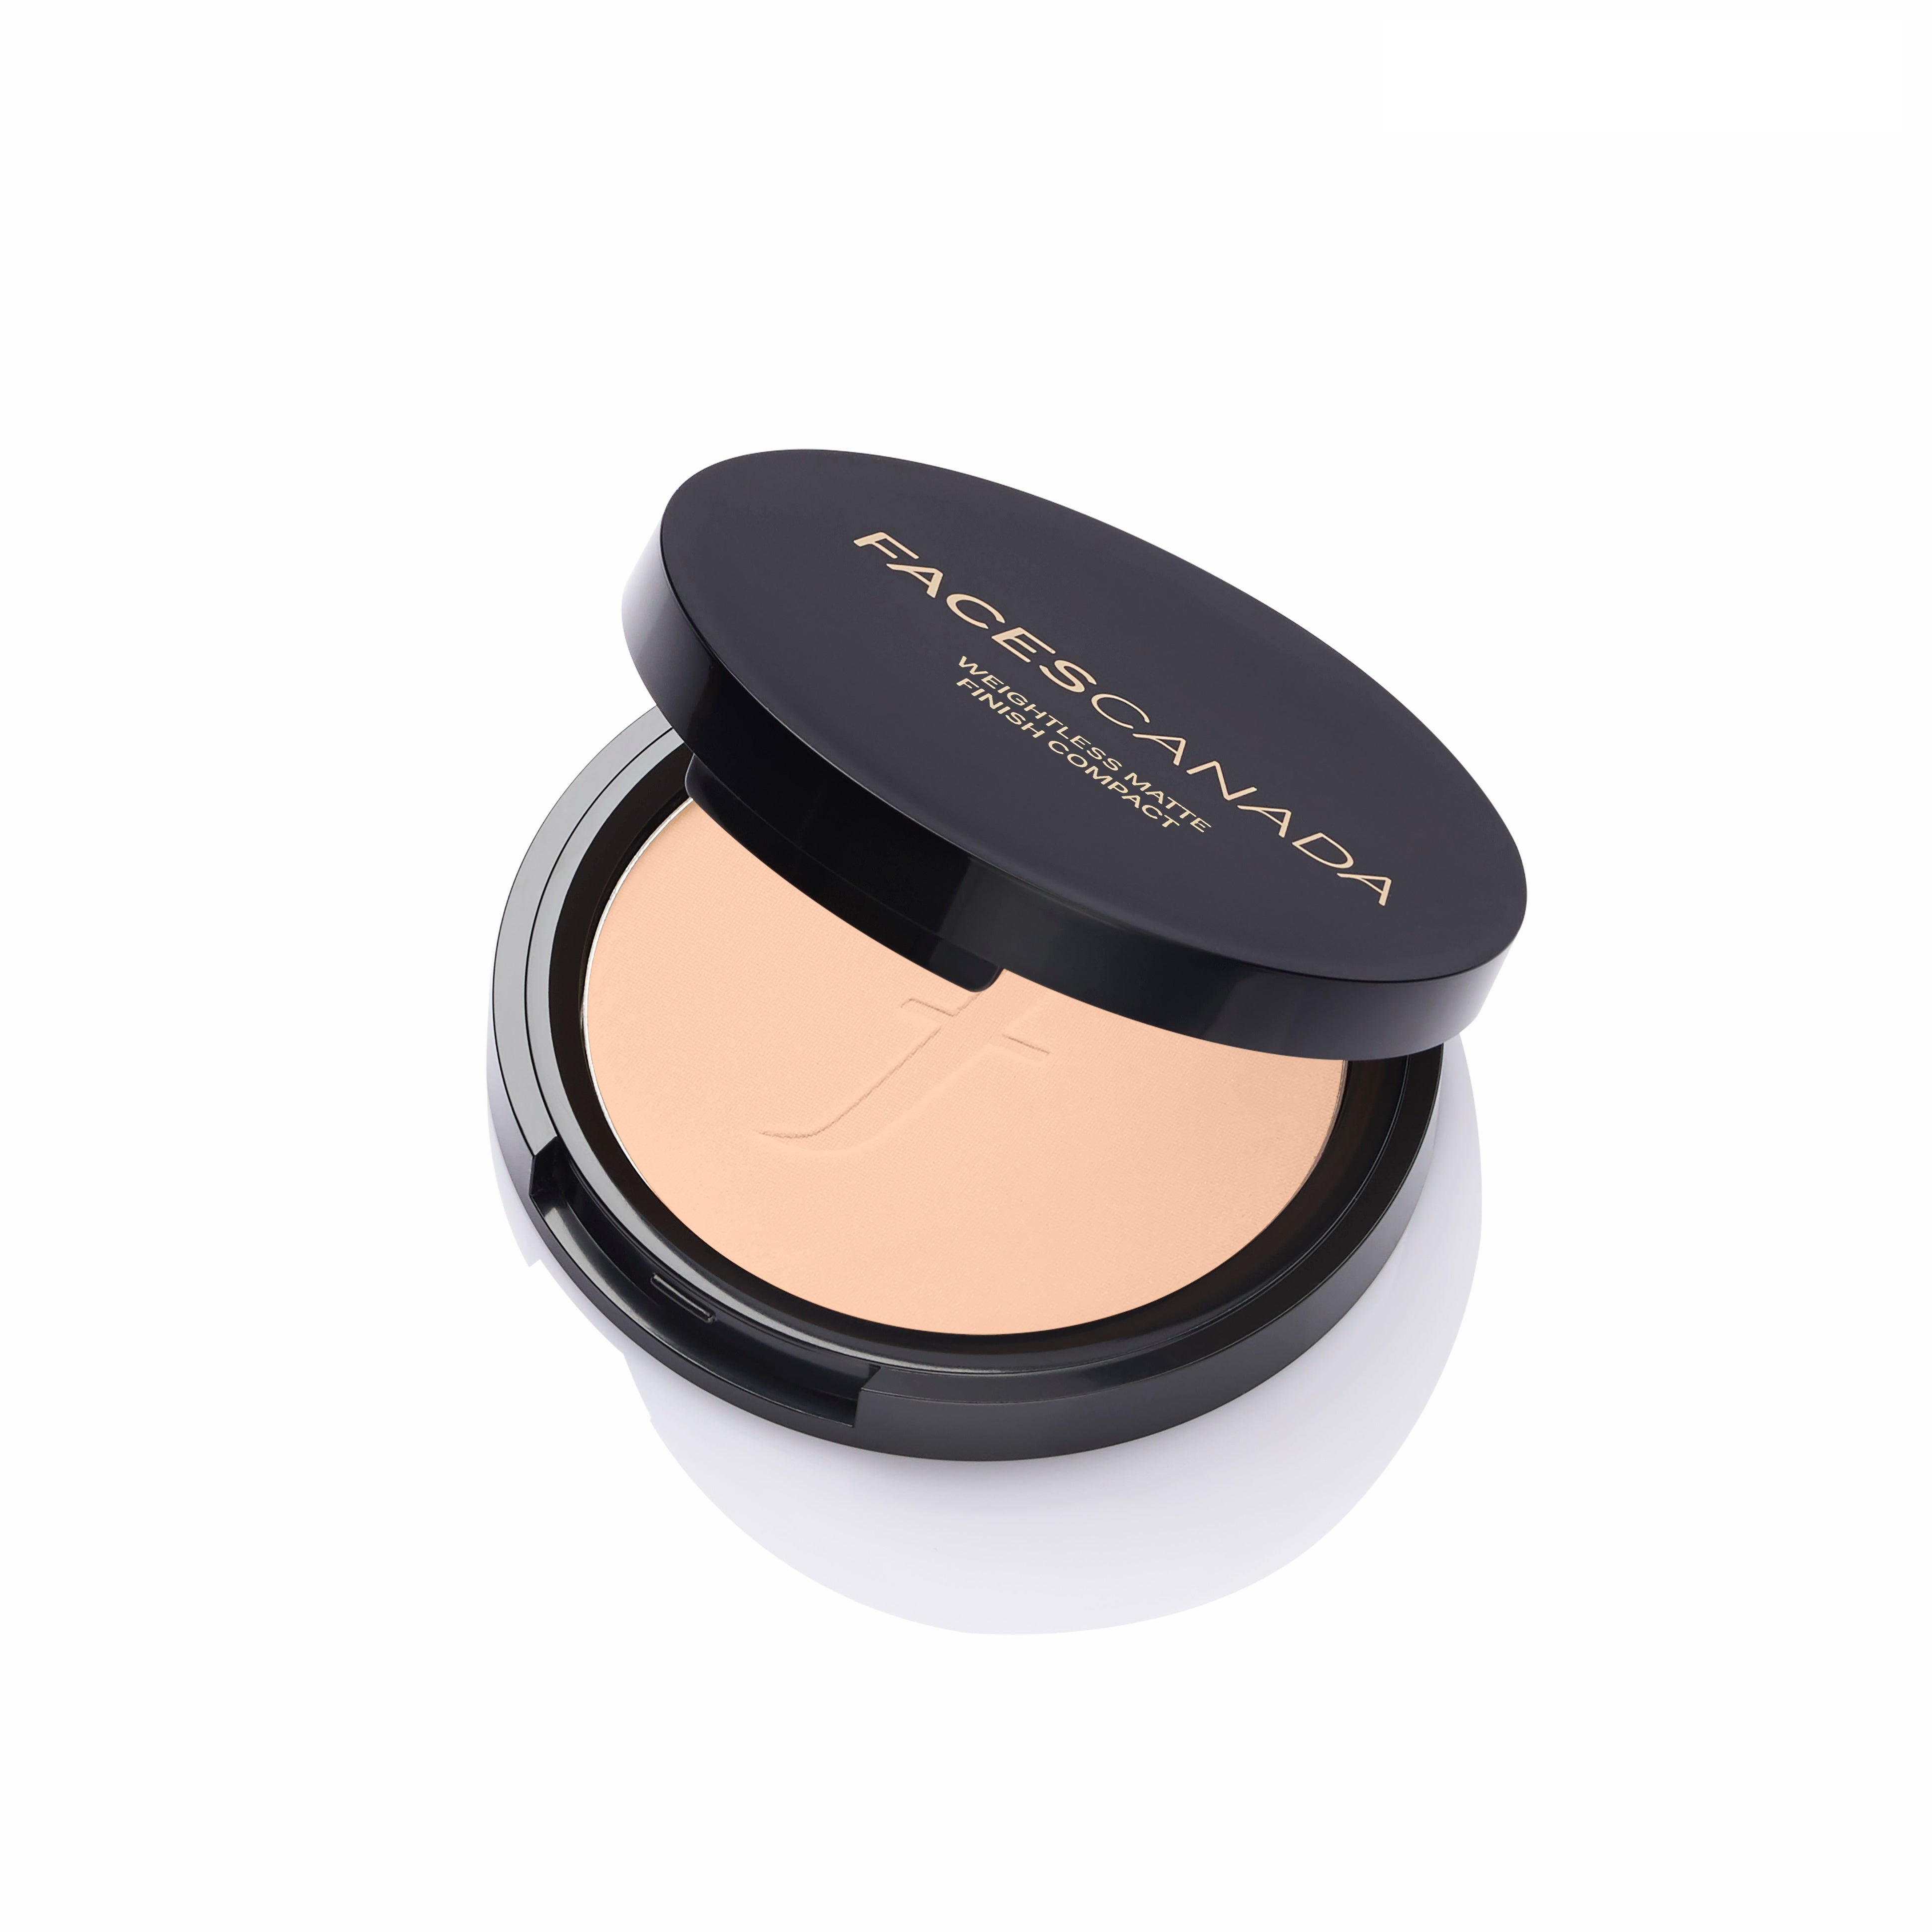 Faces Canada Weightless Matte Finish Compact Faces Canada